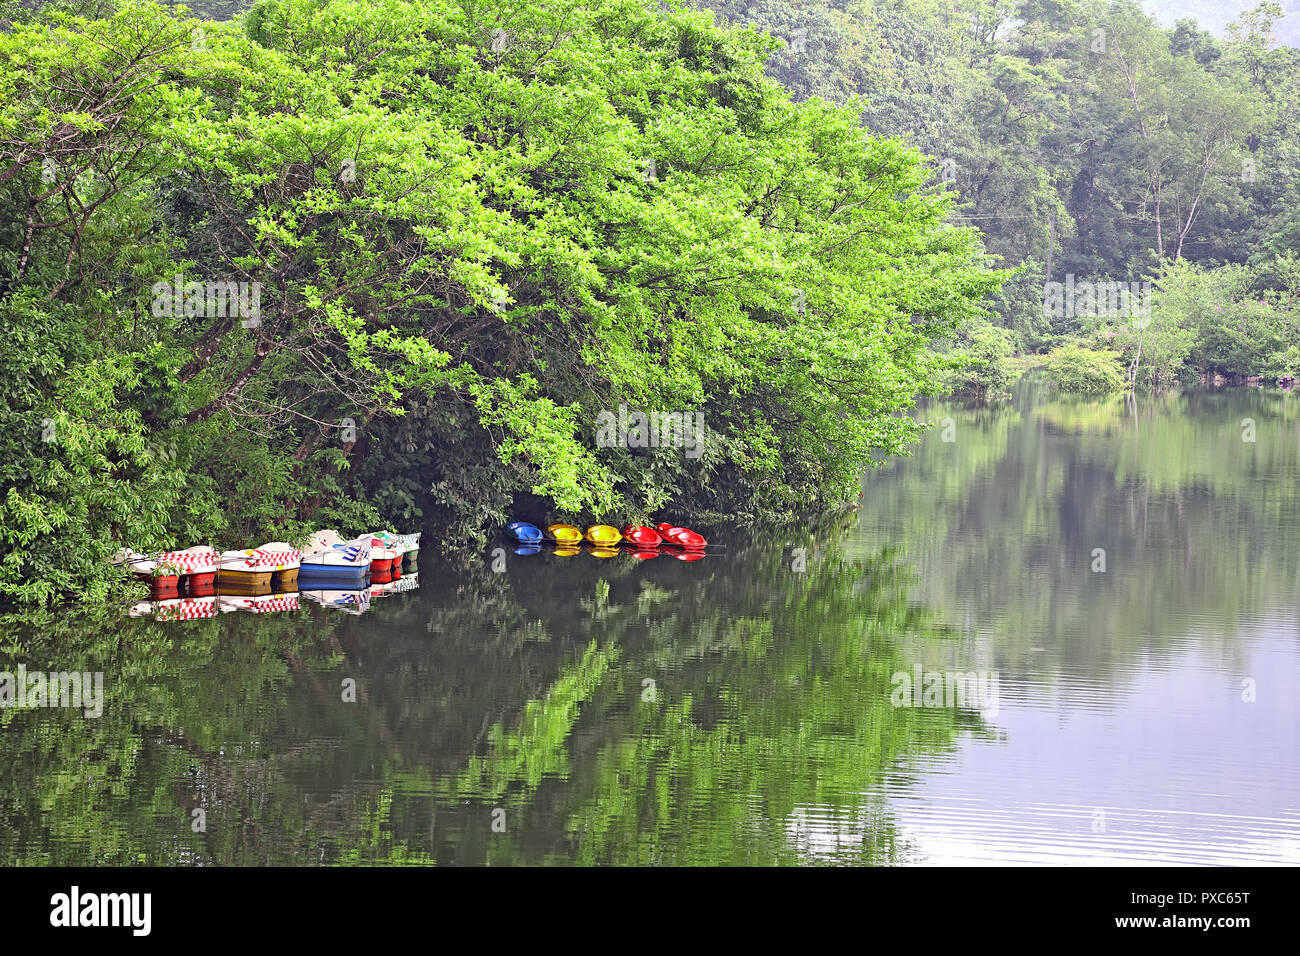 Kayaking and pedal boating water sport vessels for rent anchored in tranquil and picturesque lake in Kerala, India Stock Photo